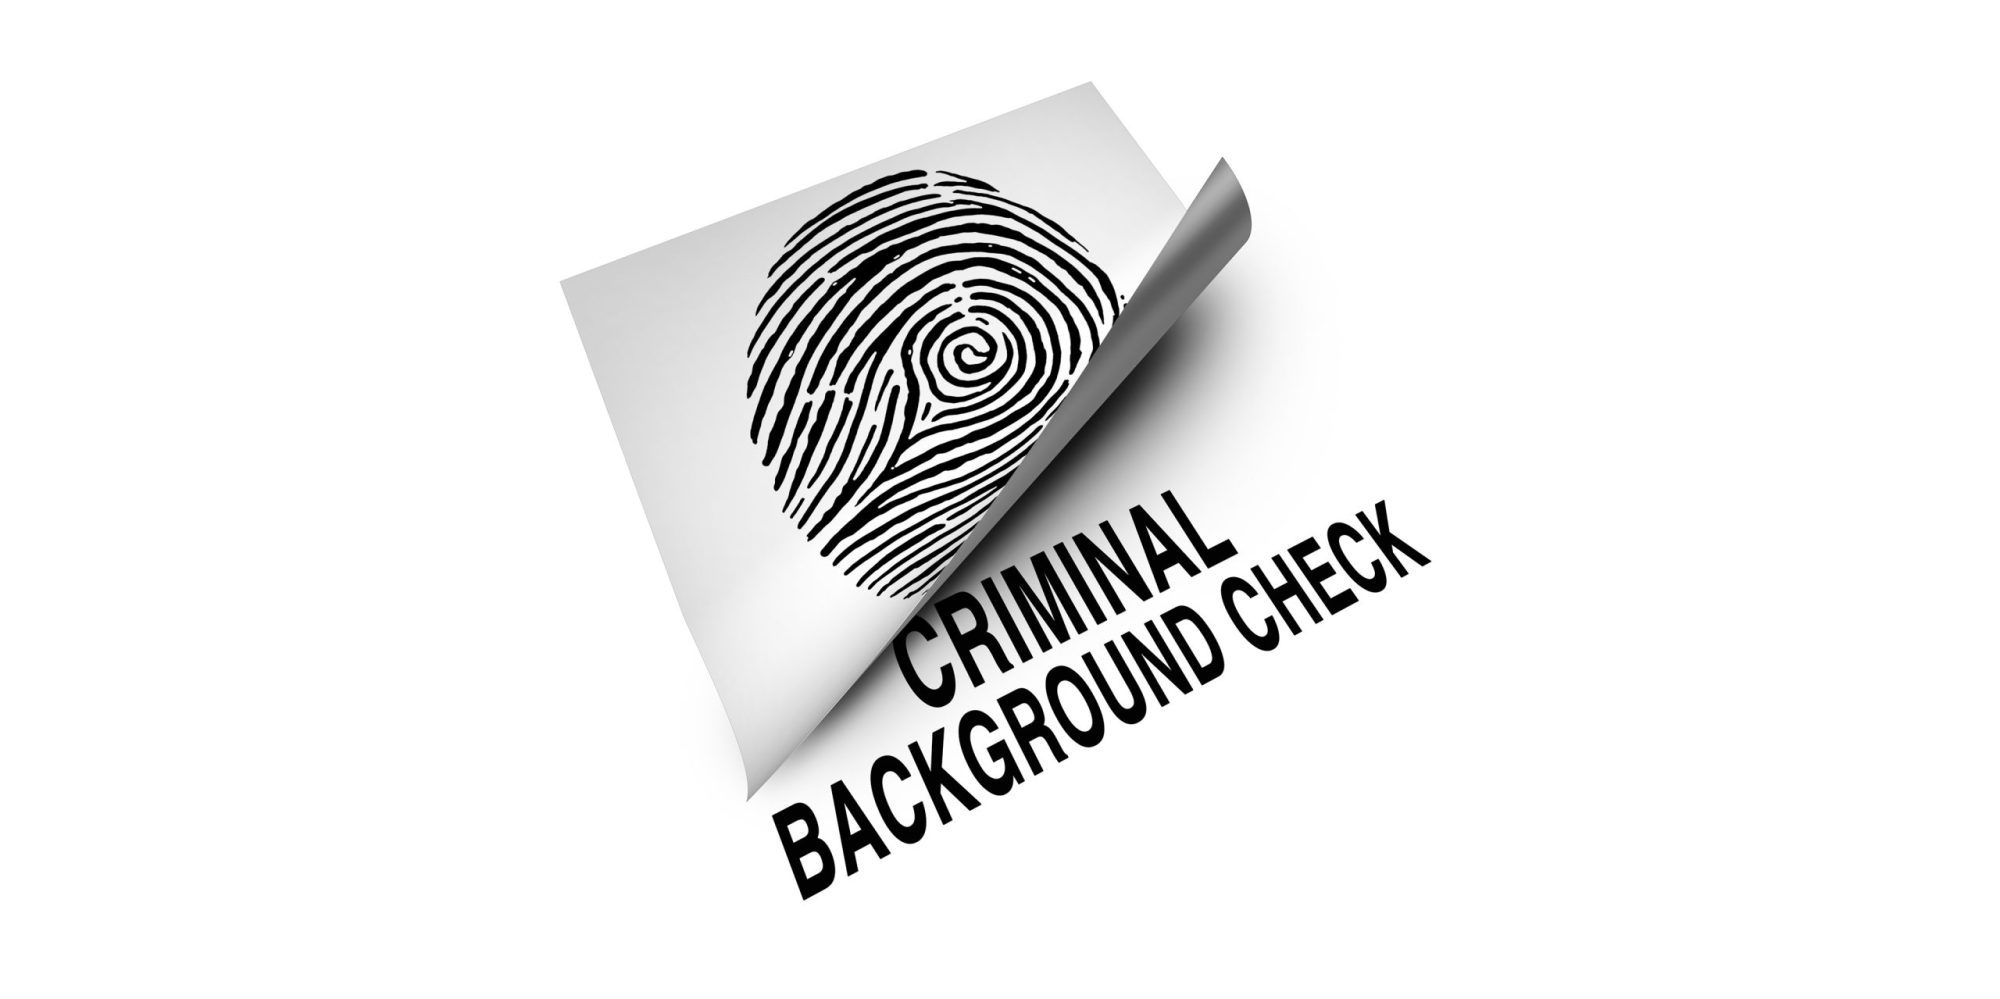 Is It Illegal for an Employer to Discriminate Based on Criminal History?